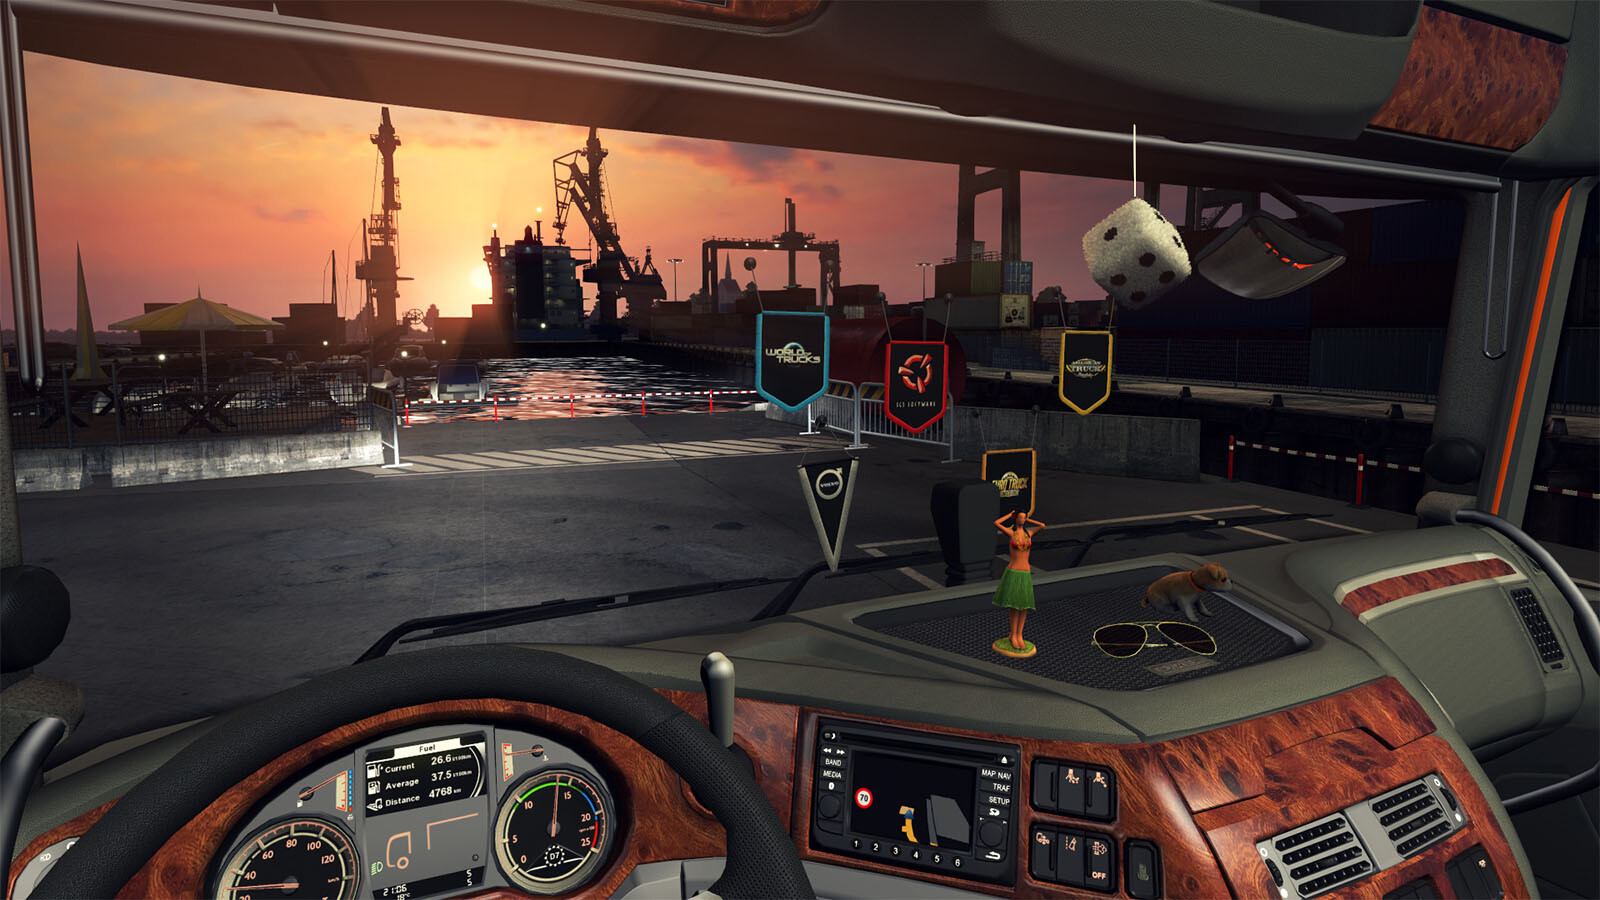 Euro Truck Simulator 2 - Cabin Accessories Steam Key for PC, Mac and Linux  - Buy now